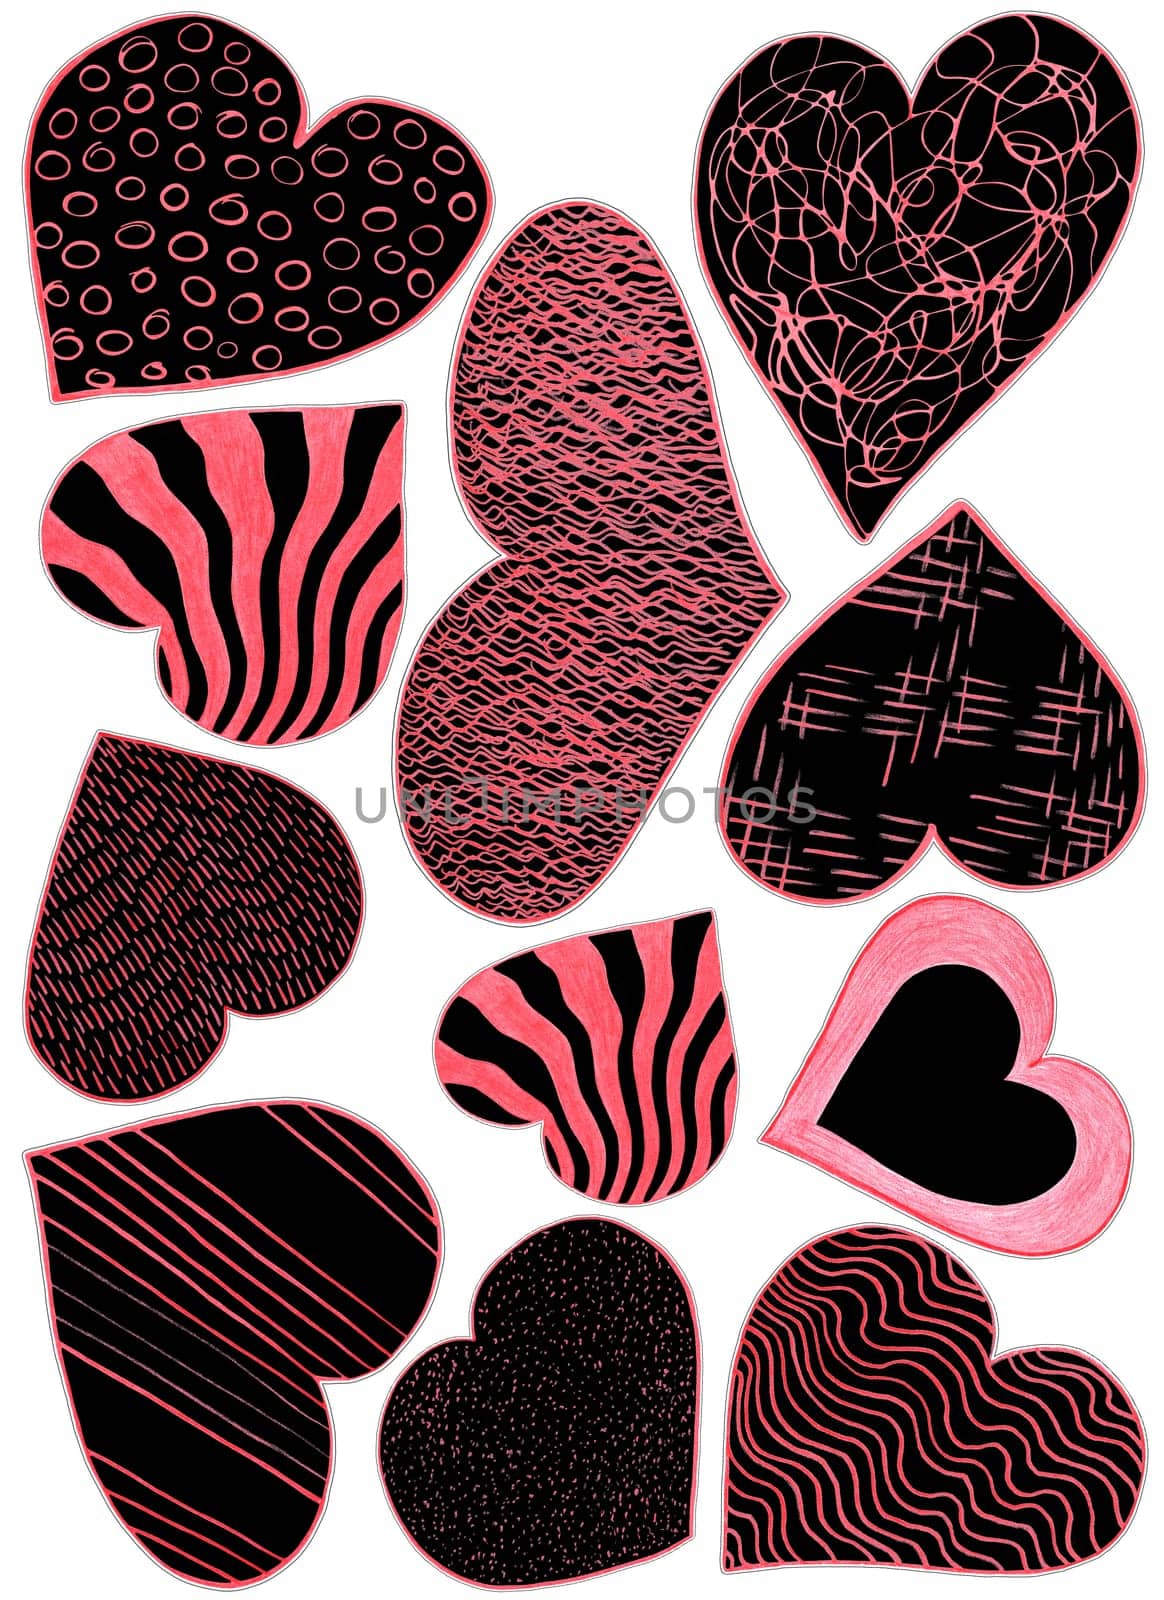 Set of Red and Black Heart Stickers Drawn by Colored Pencil. Heart Shape Sticker Collection Isolated on White Background. by Rina_Dozornaya